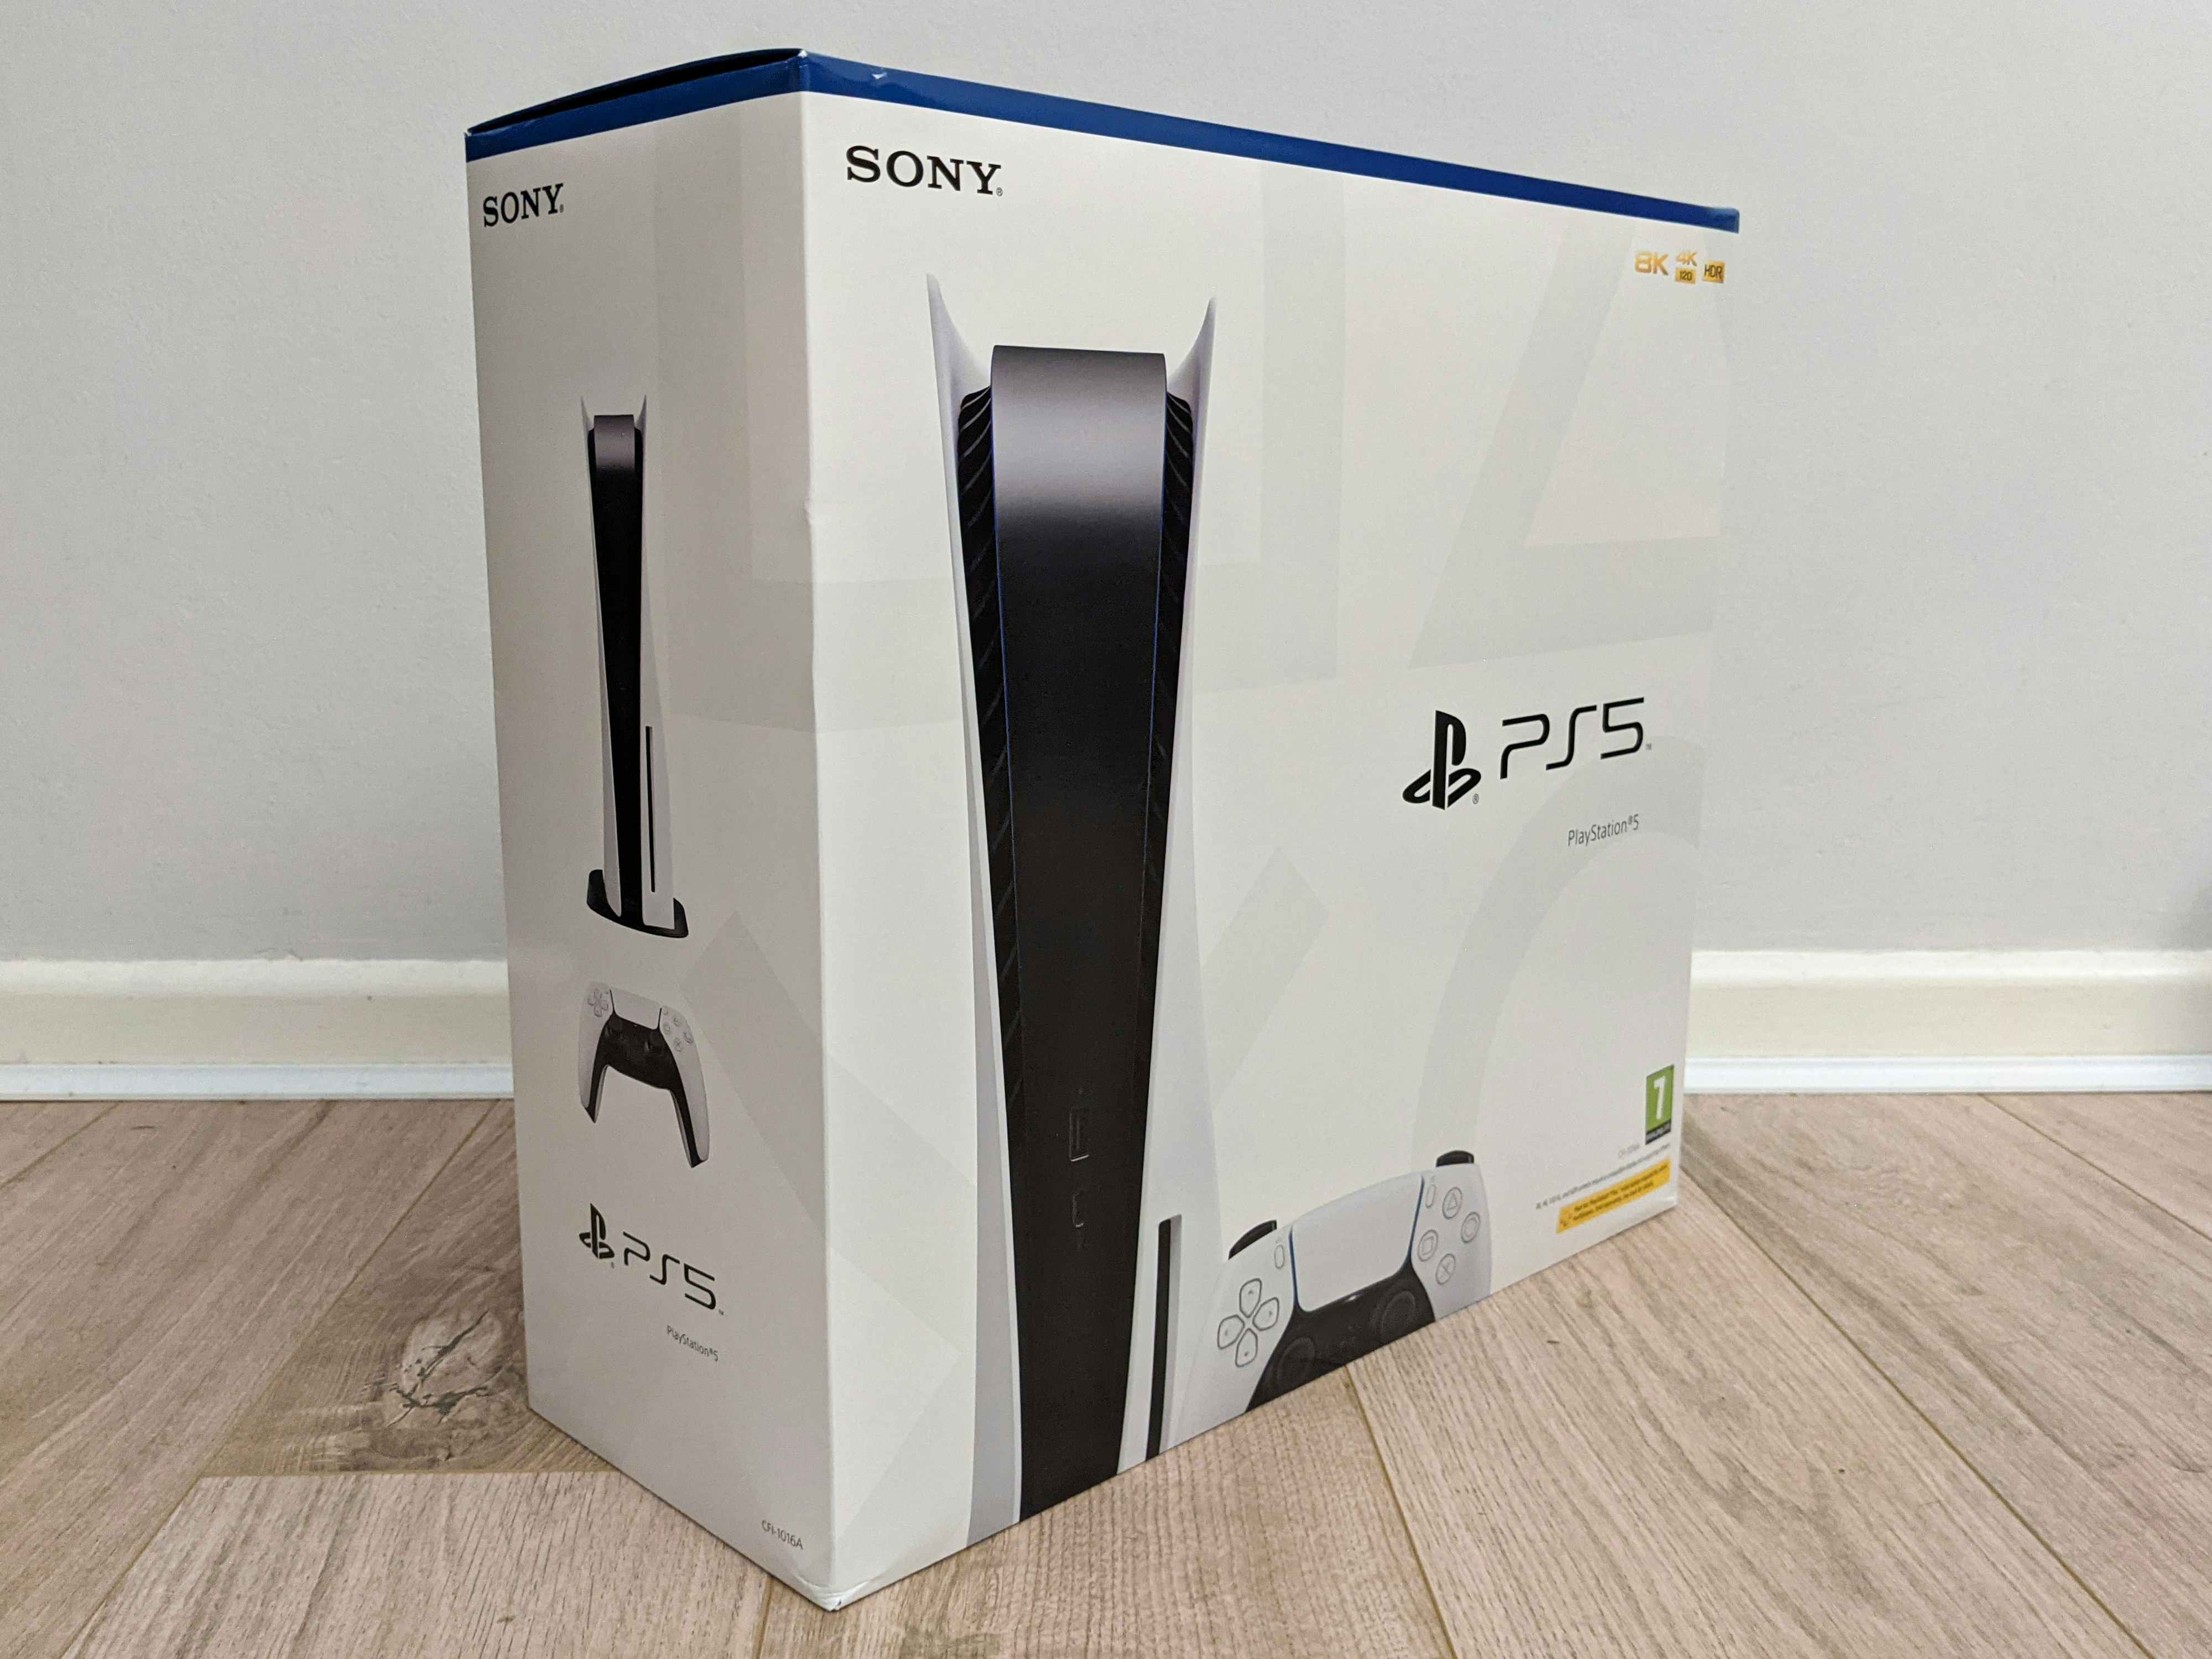 Playstation PS5 game console in box on the floor